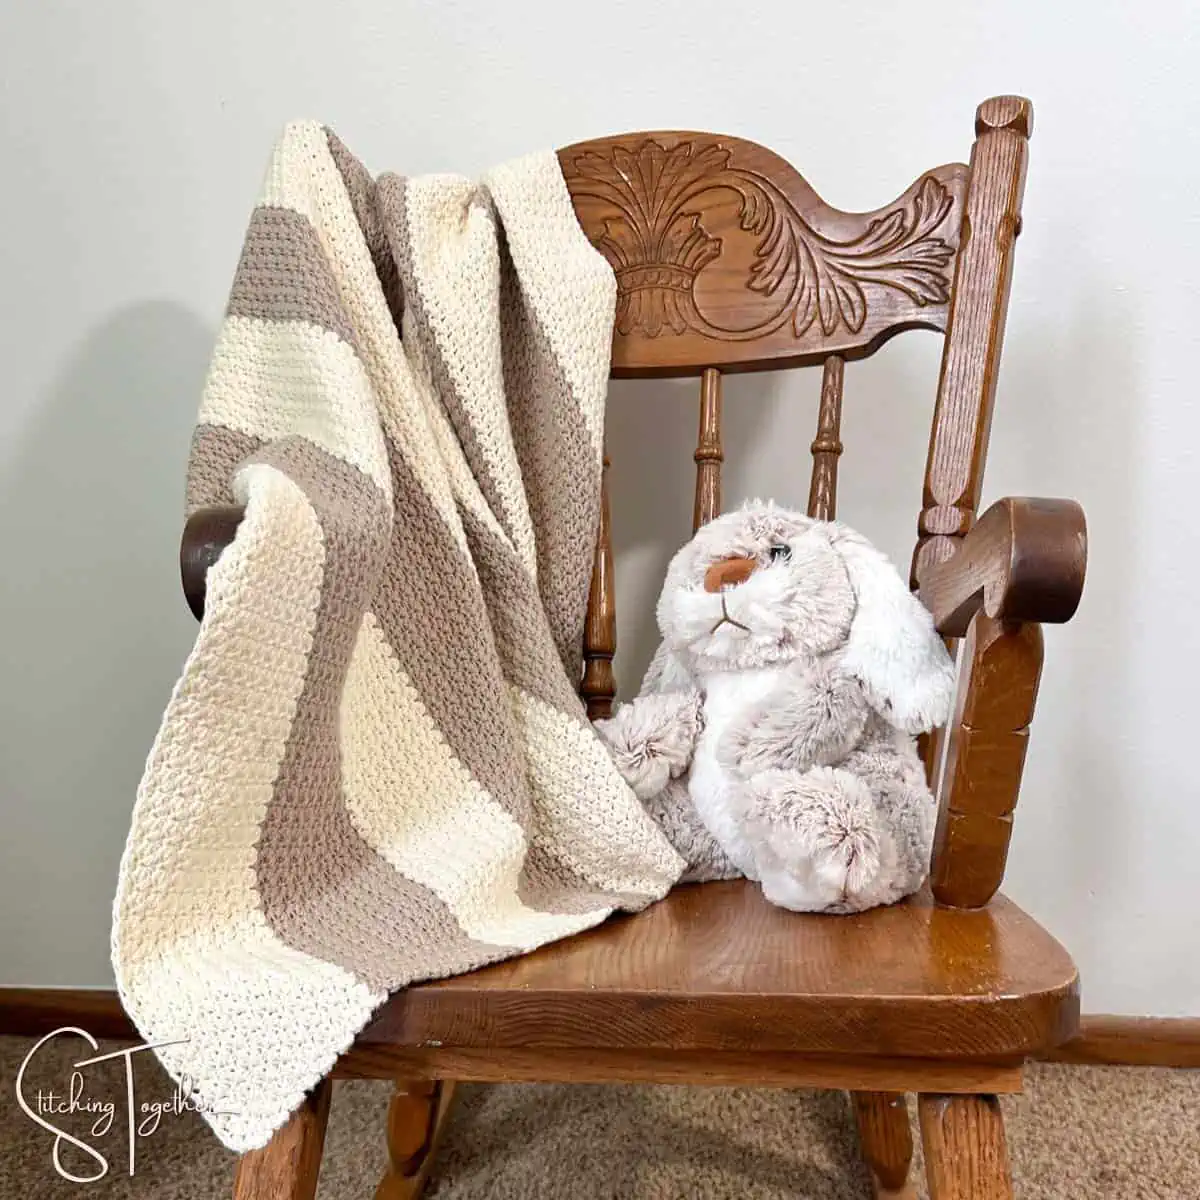 striped crochet baby blanket draped over the arm of a small rocking chair with a stuffed bunny on the seat